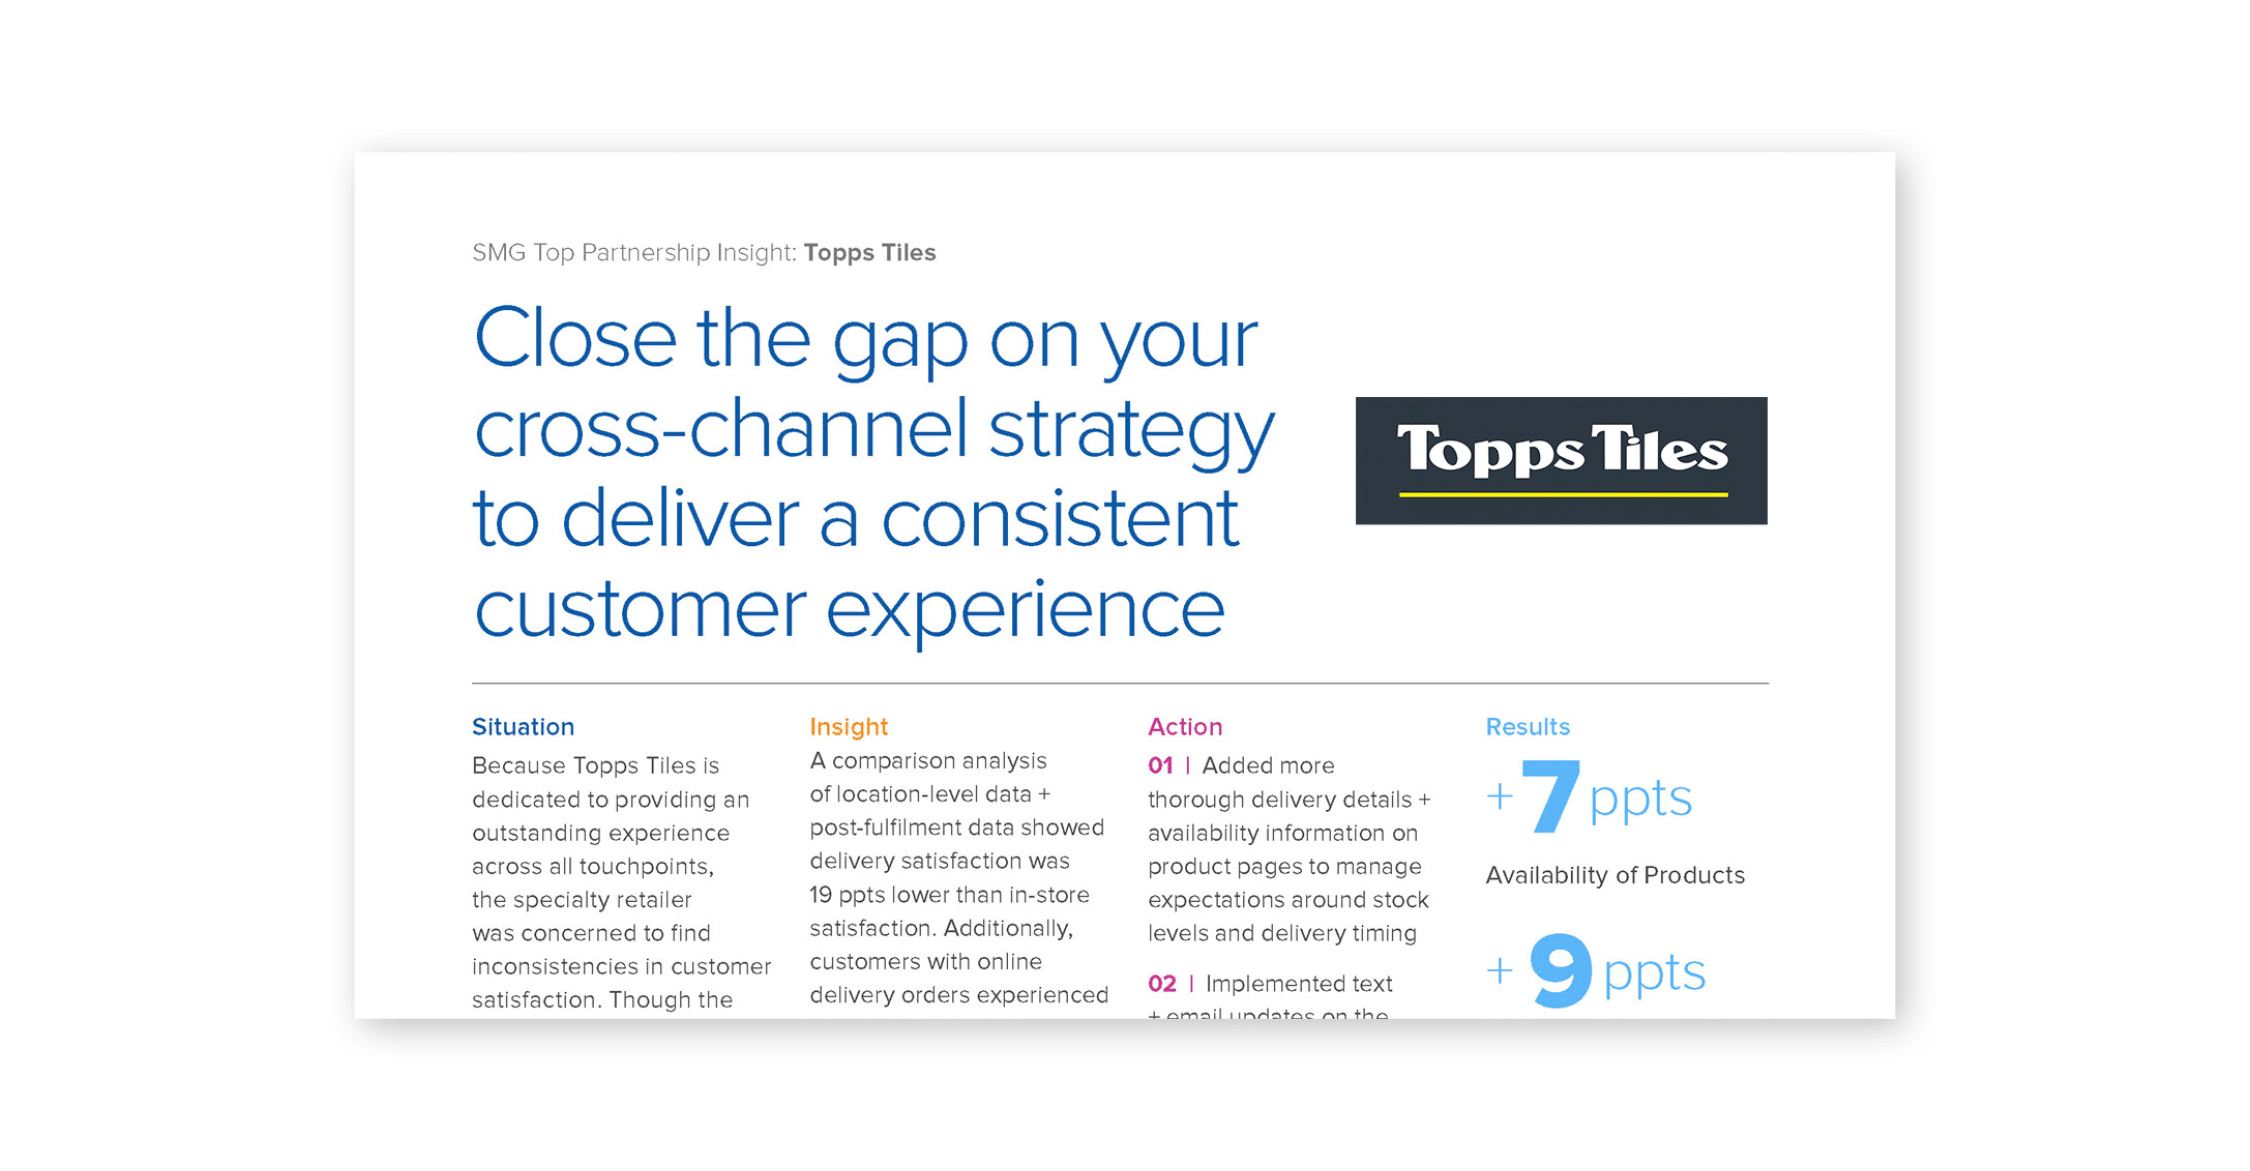 Close the gap on your cross-channel strategy to deliver a consistent customer experience